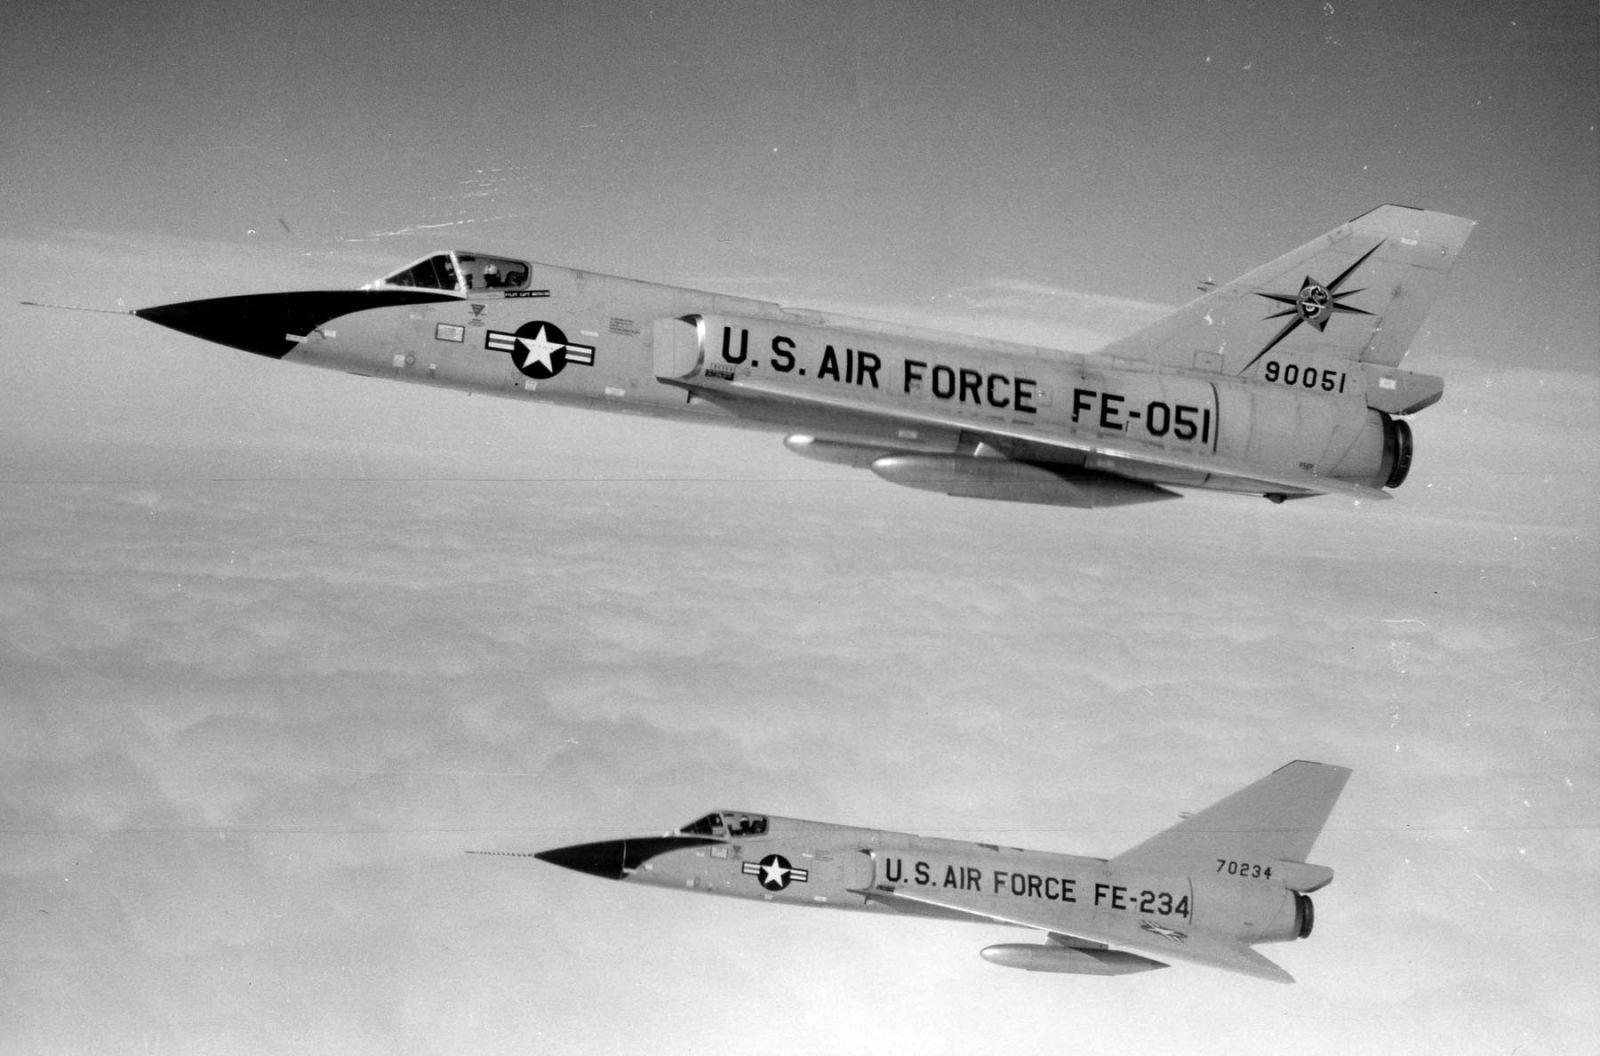 Two US Air Force Convair F-106A Delta Darts of the 318th Fighter Interceptor Squadron from McChord Air Force Base patrol the skies over Alaska in 1963 (US Air Force)